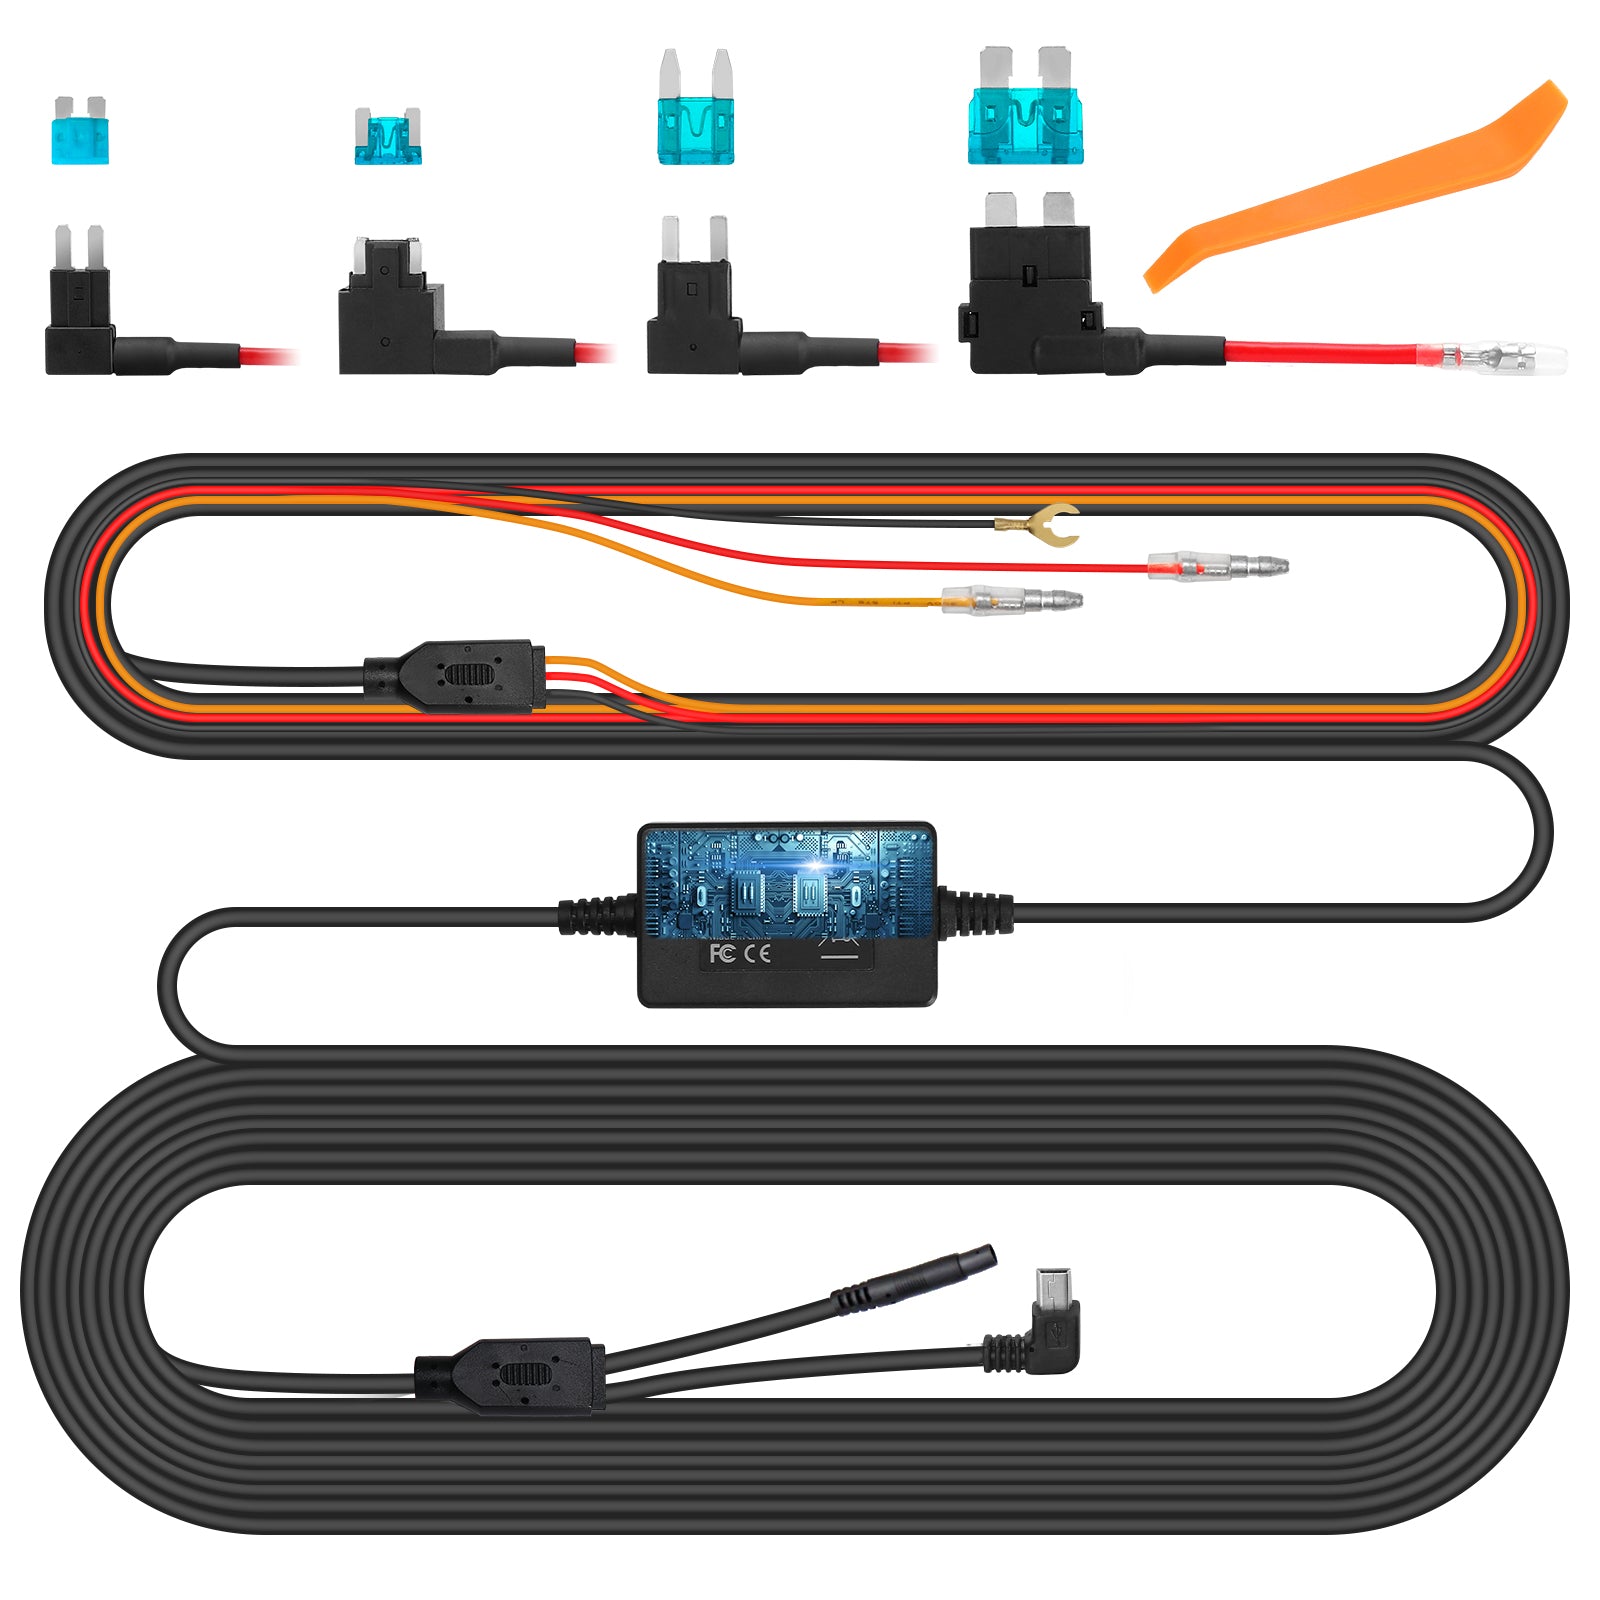 Dash Cam Hardwire Kit with 4 x Fuse Taps, 4 x Blade Fuses and 1 x Pry Tool.